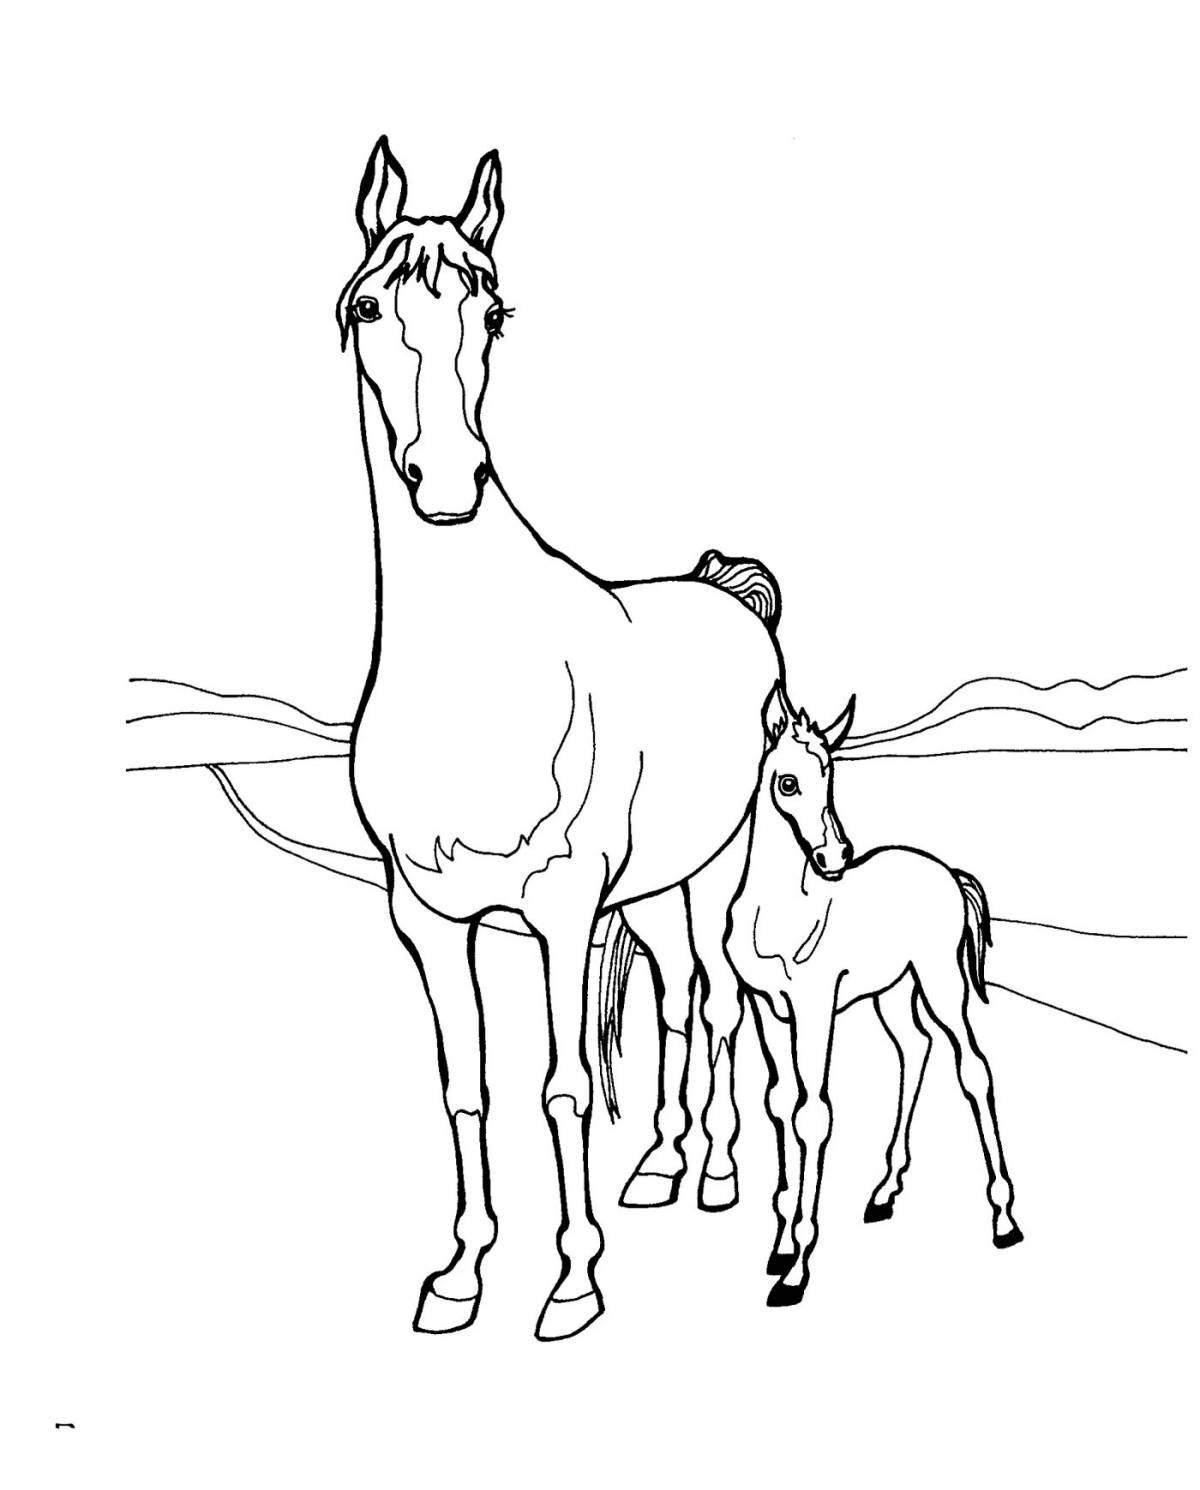 Coloring book calm colt for kids